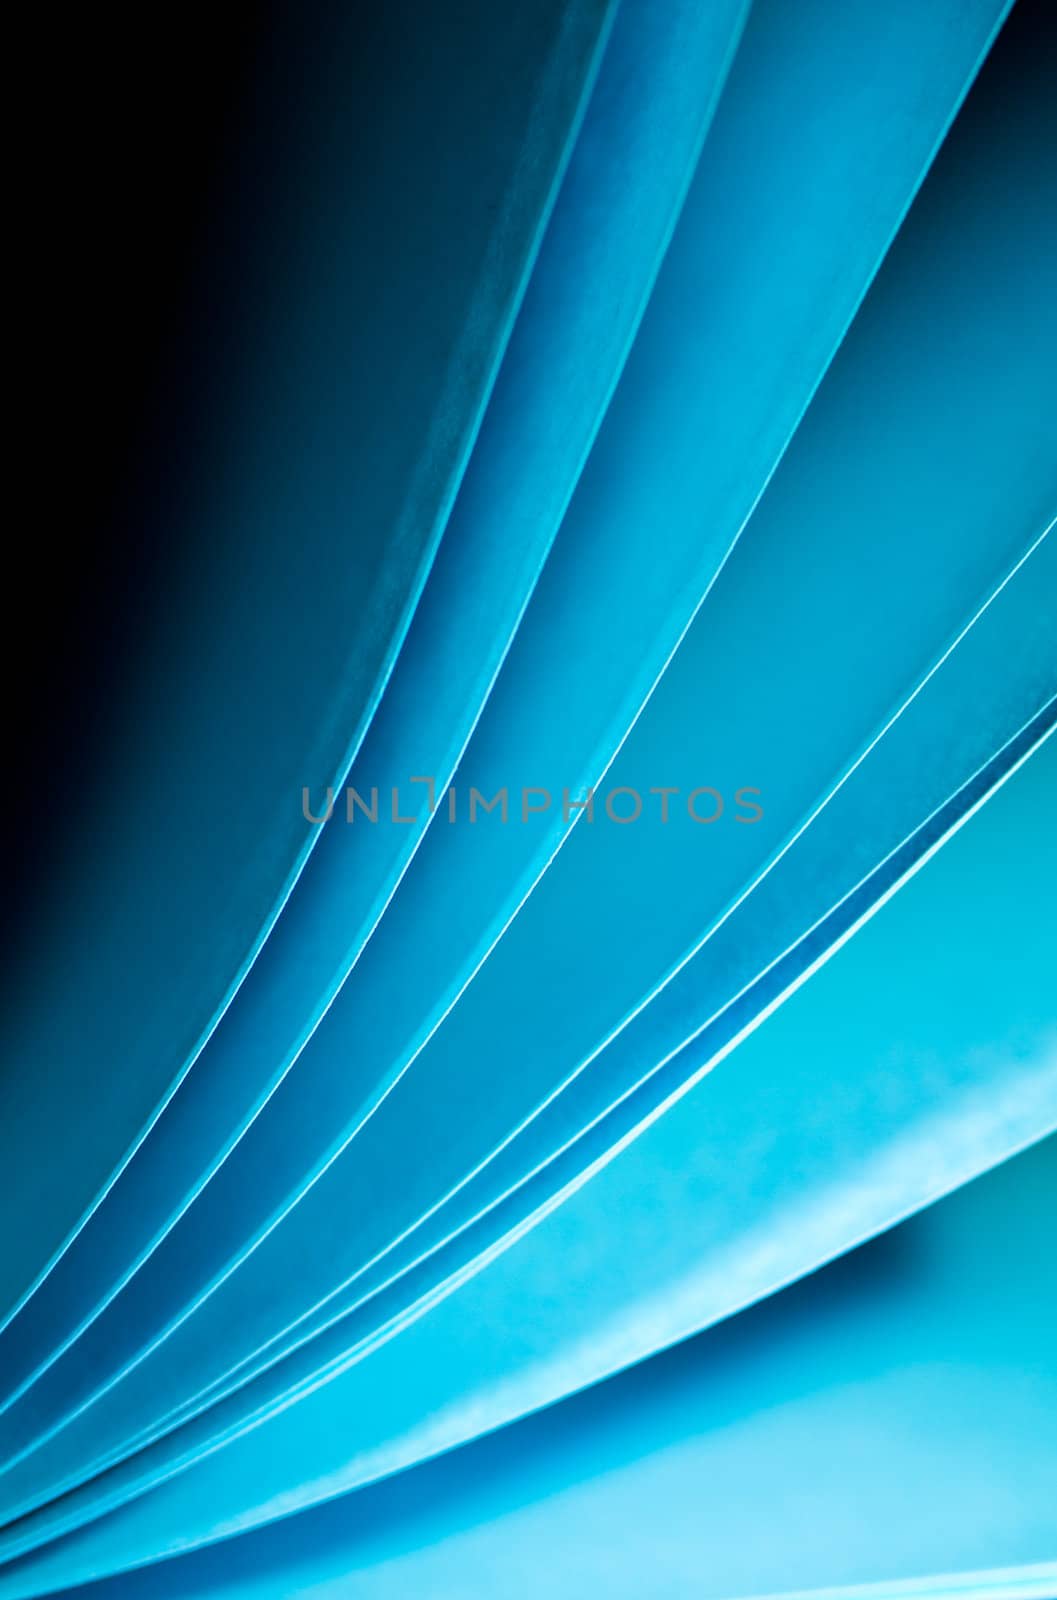 Blue notepad paper illuminated by LED viewed in portrait orientation arise from lower left angle